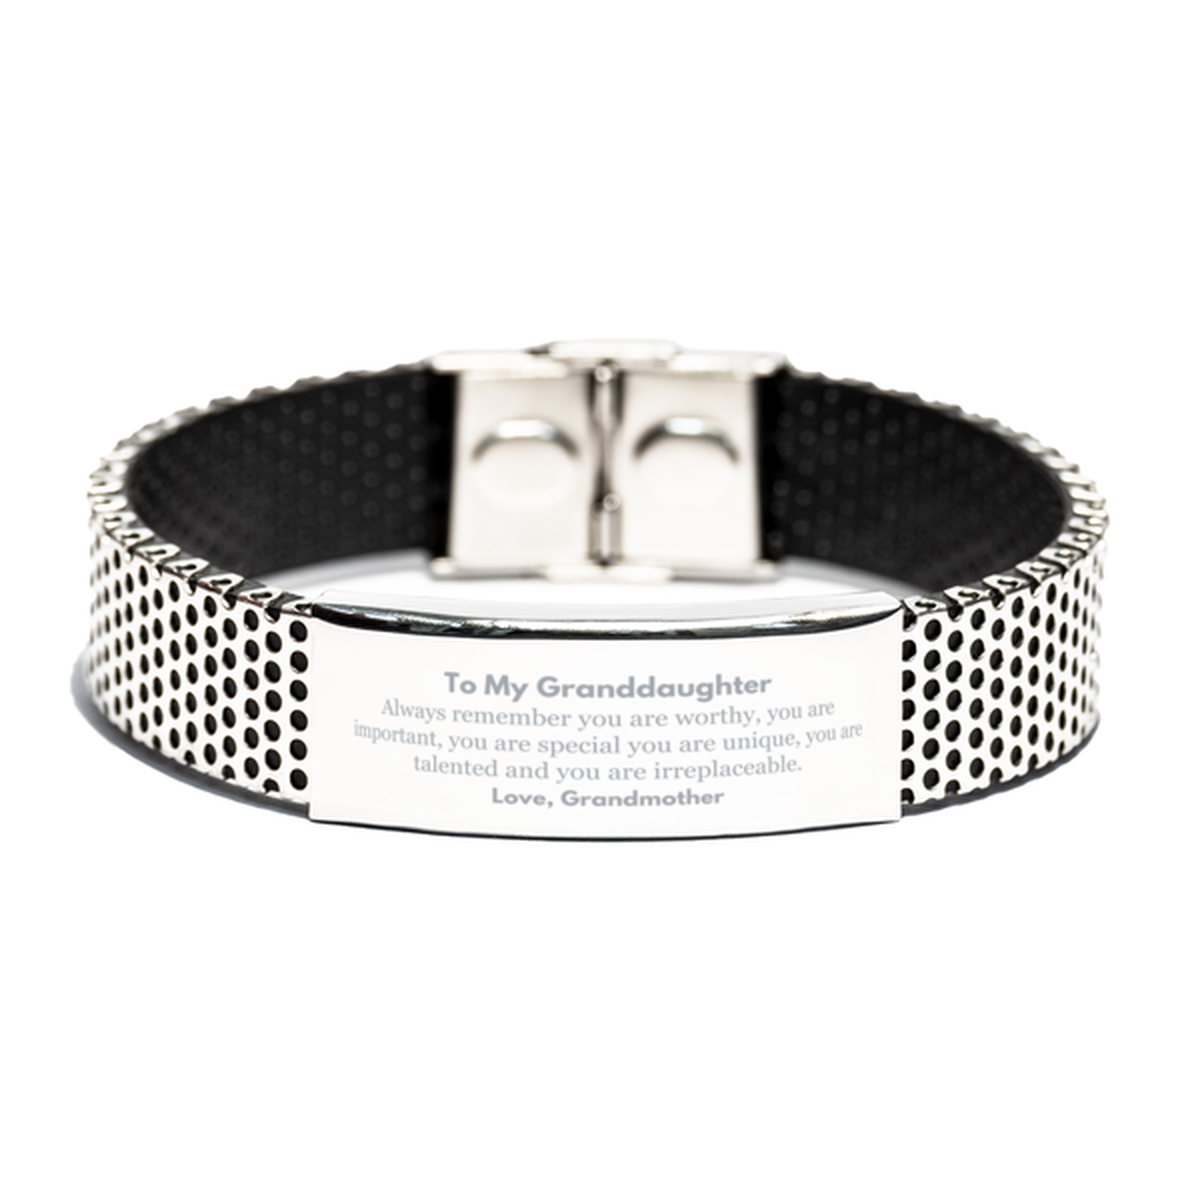 Granddaughter Birthday Gifts from Grandmother, Inspirational Stainless Steel Bracelet for Granddaughter Christmas Graduation Gifts for Granddaughter Always remember you are worthy, you are important. Love, Grandmother